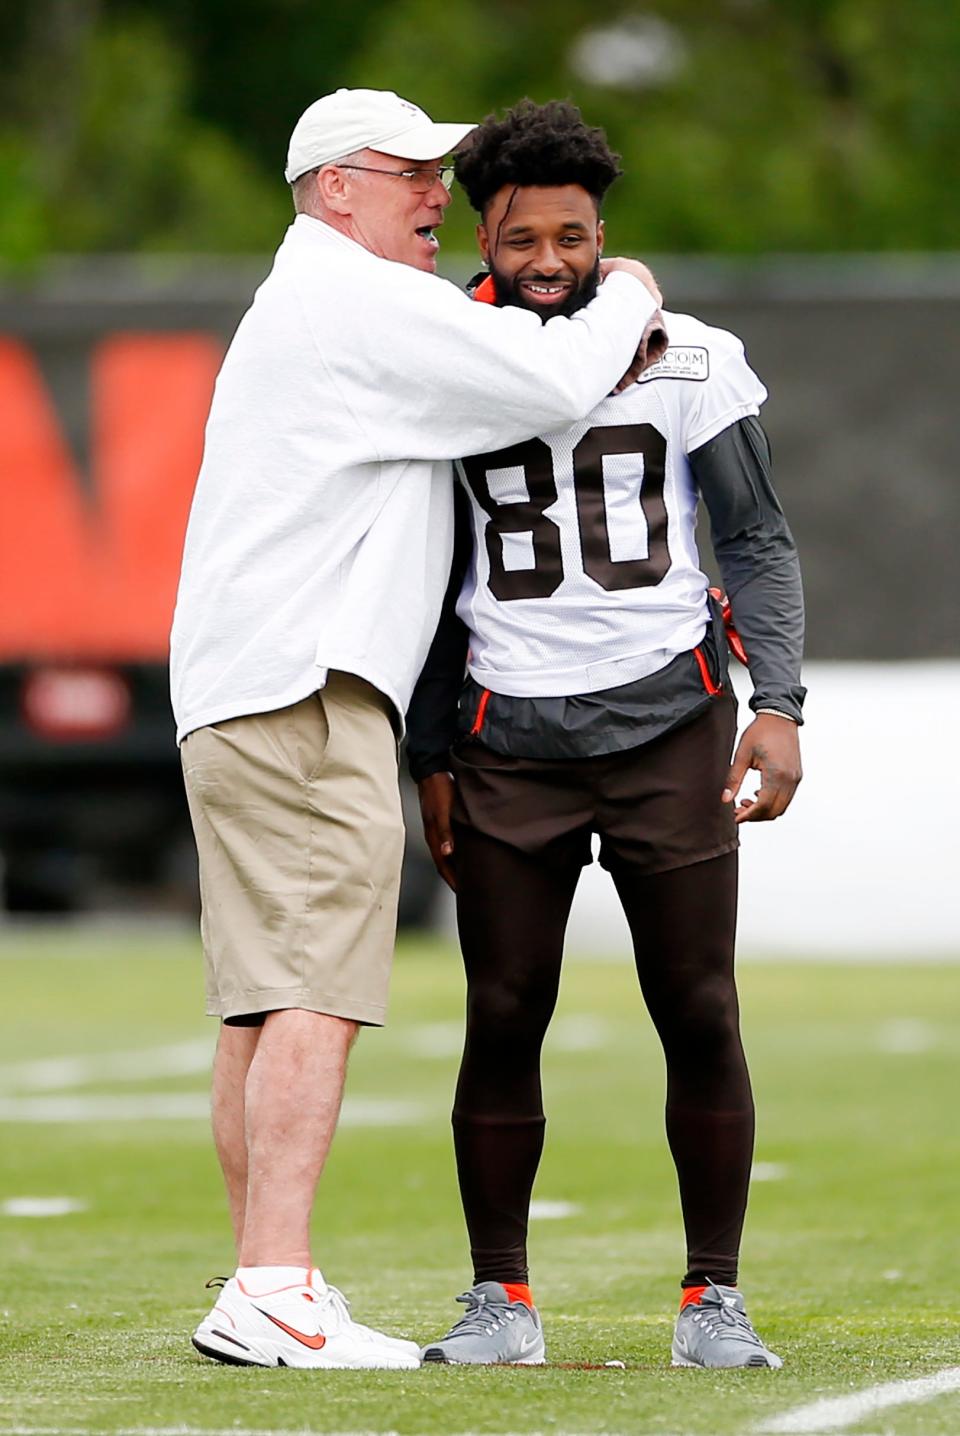 Browns wide receiver Jarvis Landry gets a hug from general manager John Dorsey at the team's NFL football training facility in Berea, Tuesday, June 4, 2019. (AP Photo/Ron Schwane)